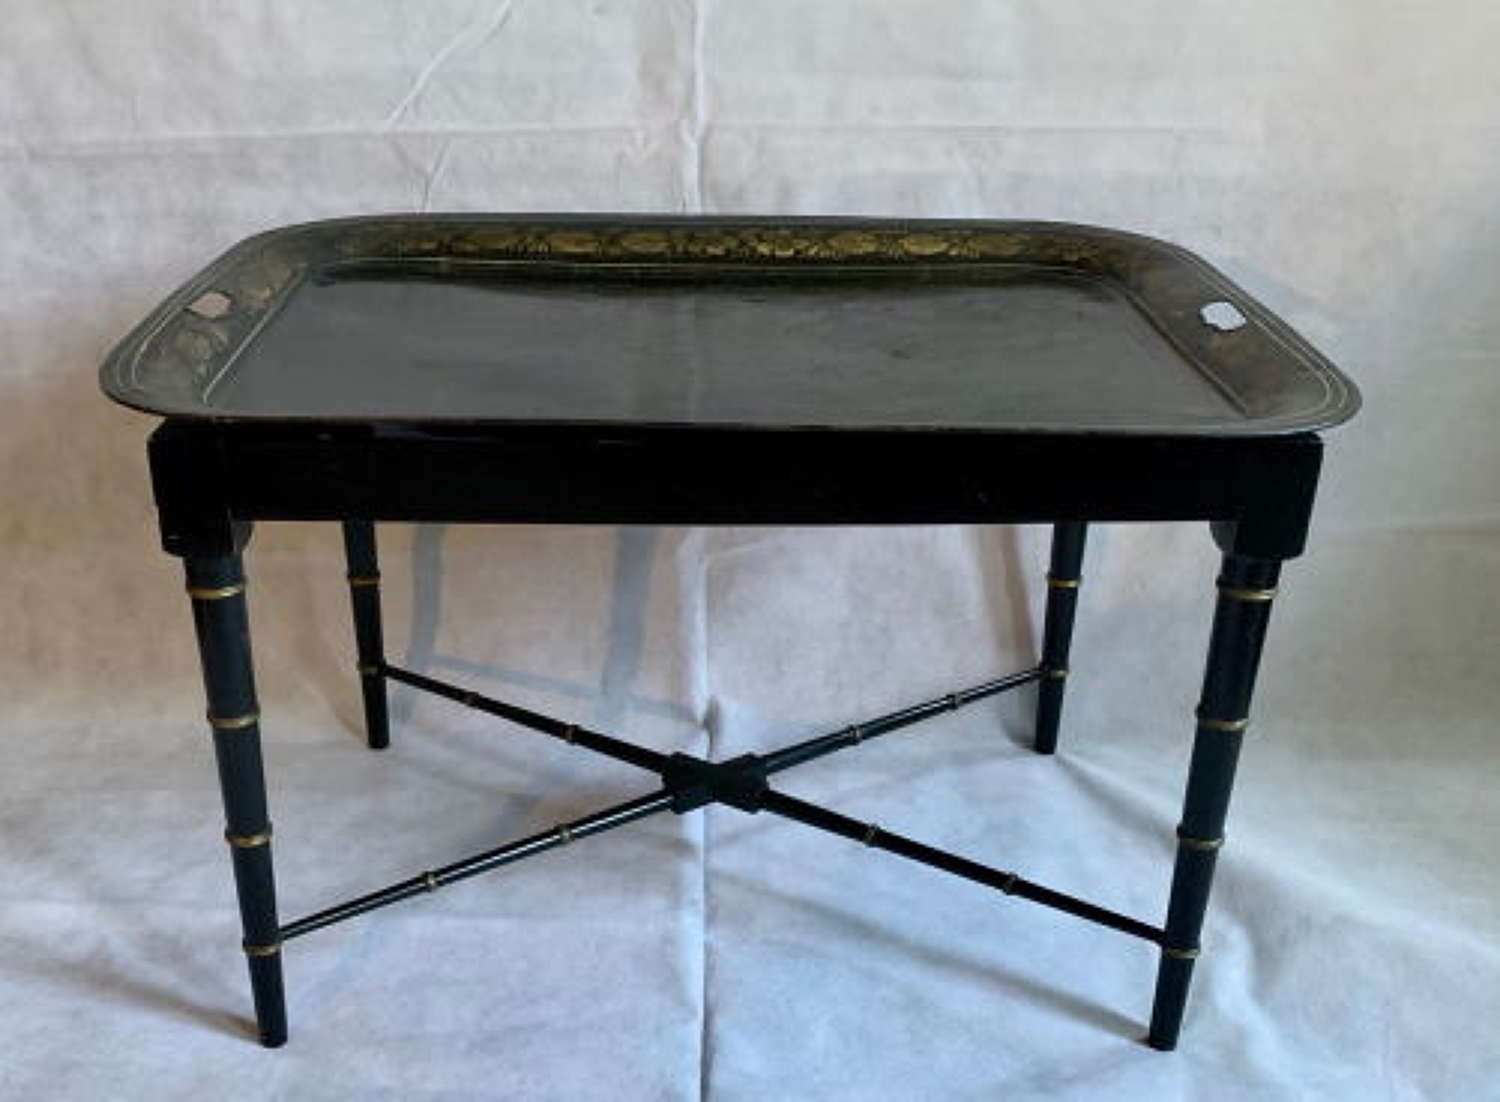 Toll Ware Tray on Base Coffee Table c.1900